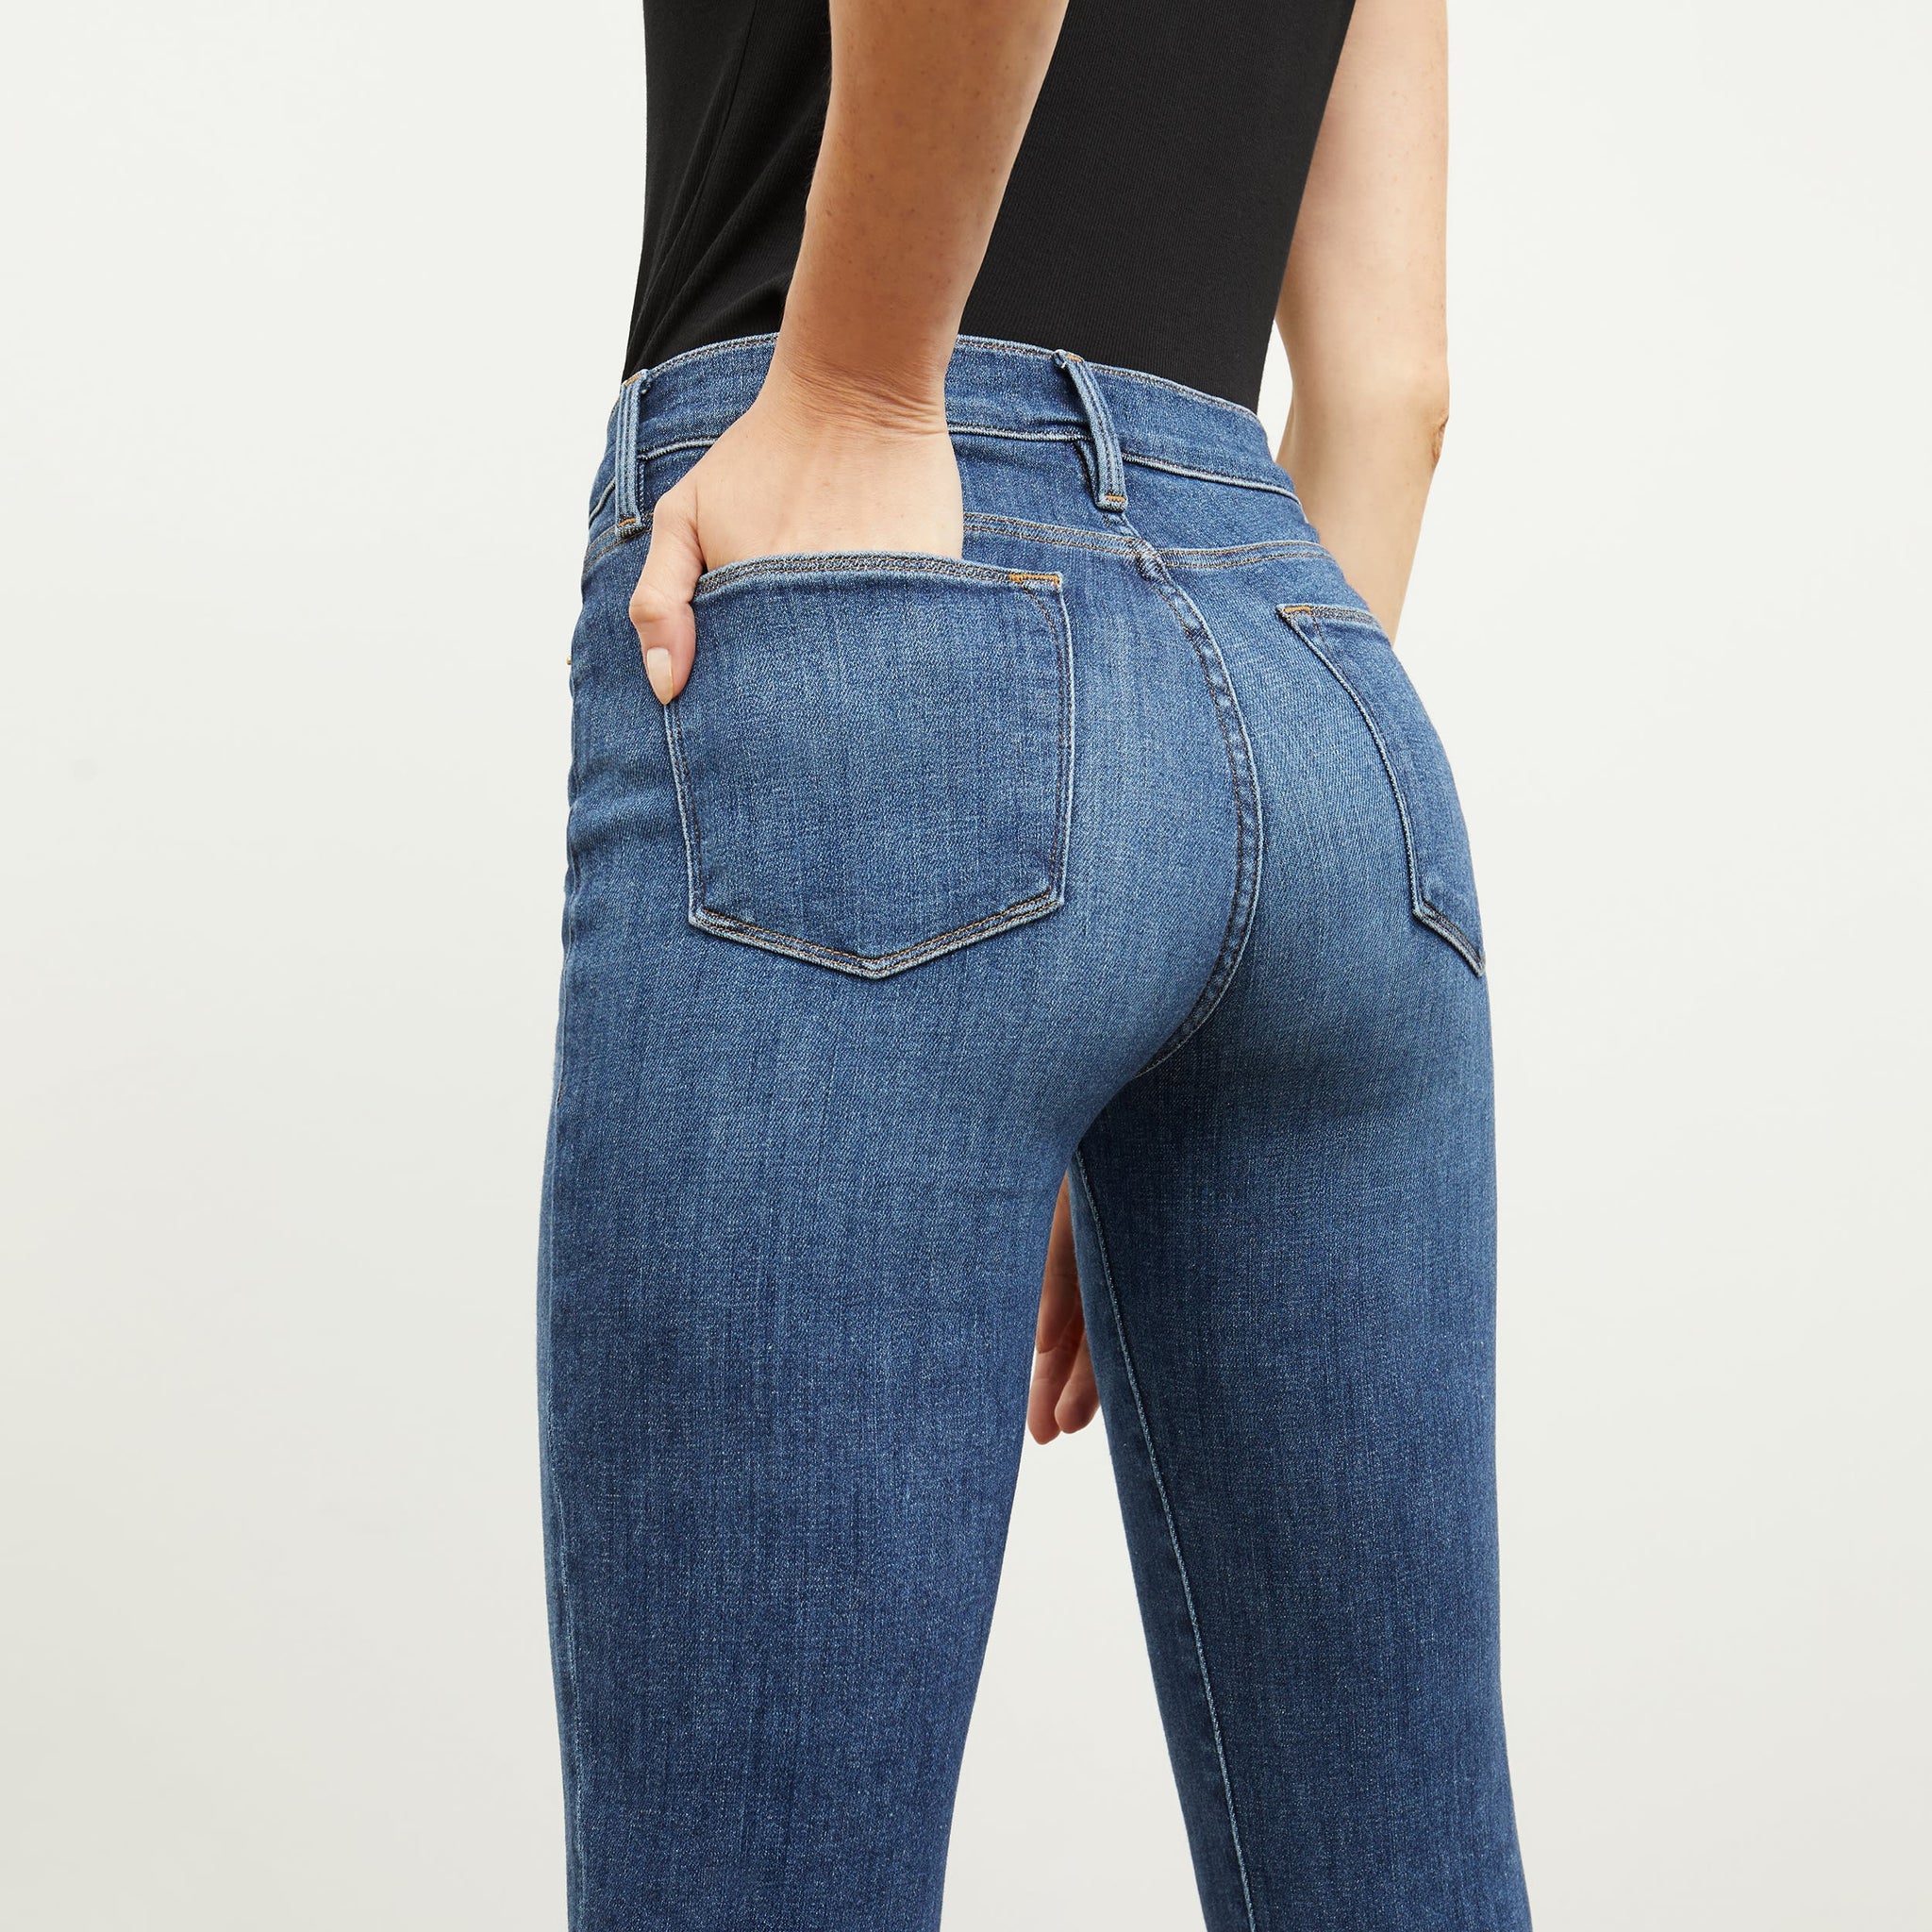 Back image of a woman standing wearing the FRAME Denim Le High Straight in Bestia